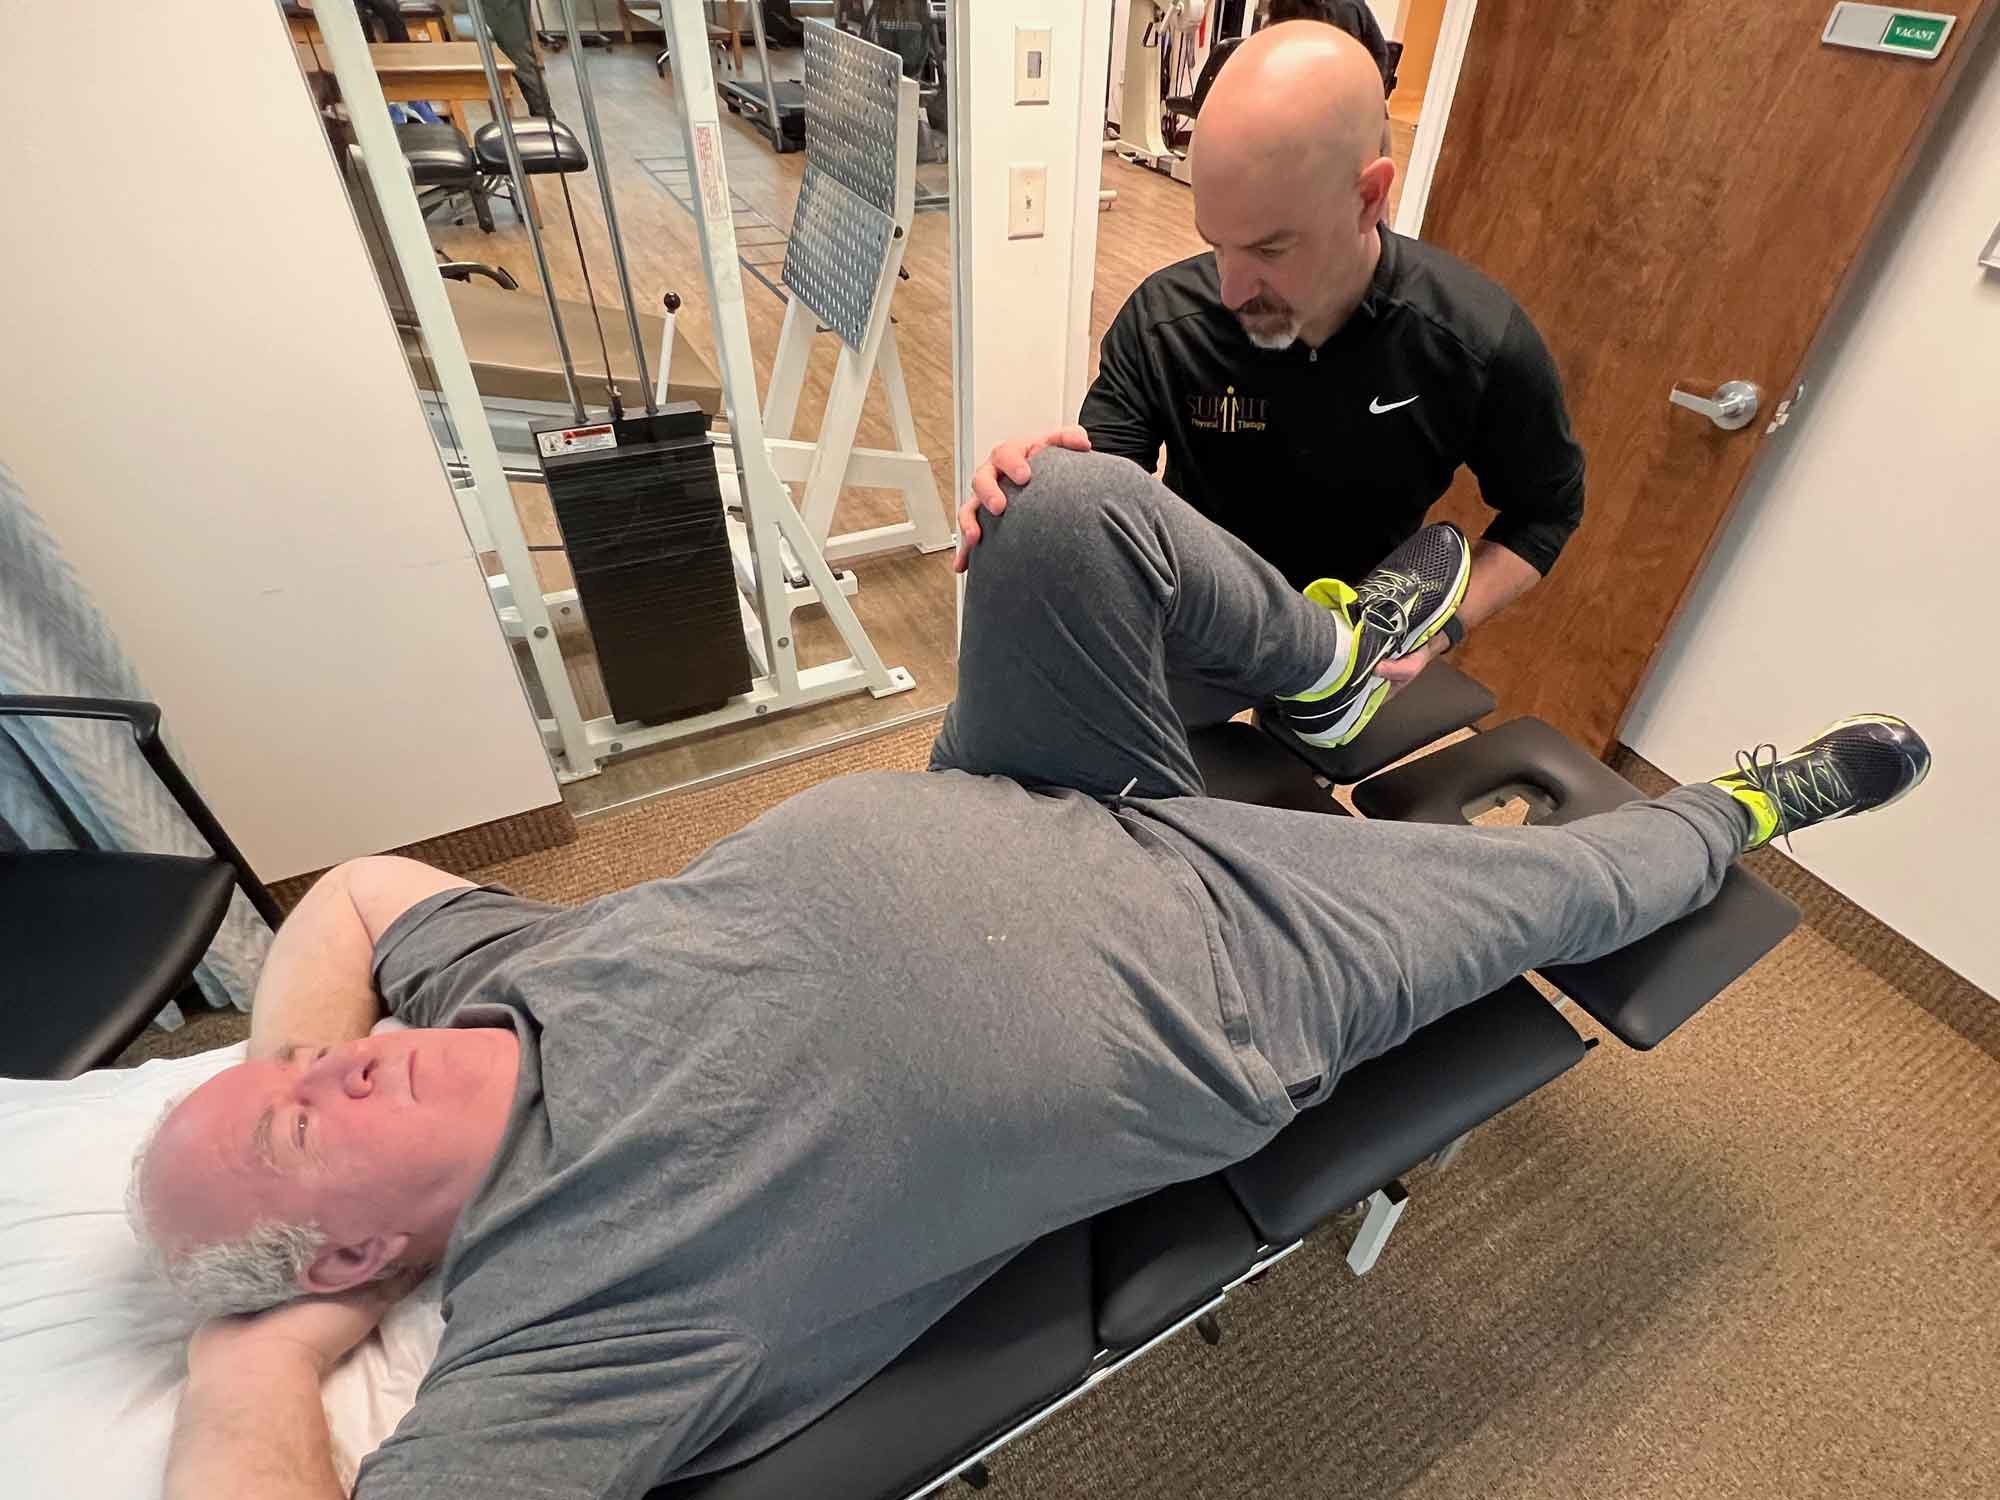  A therapist works with his patient on knee mobility. 